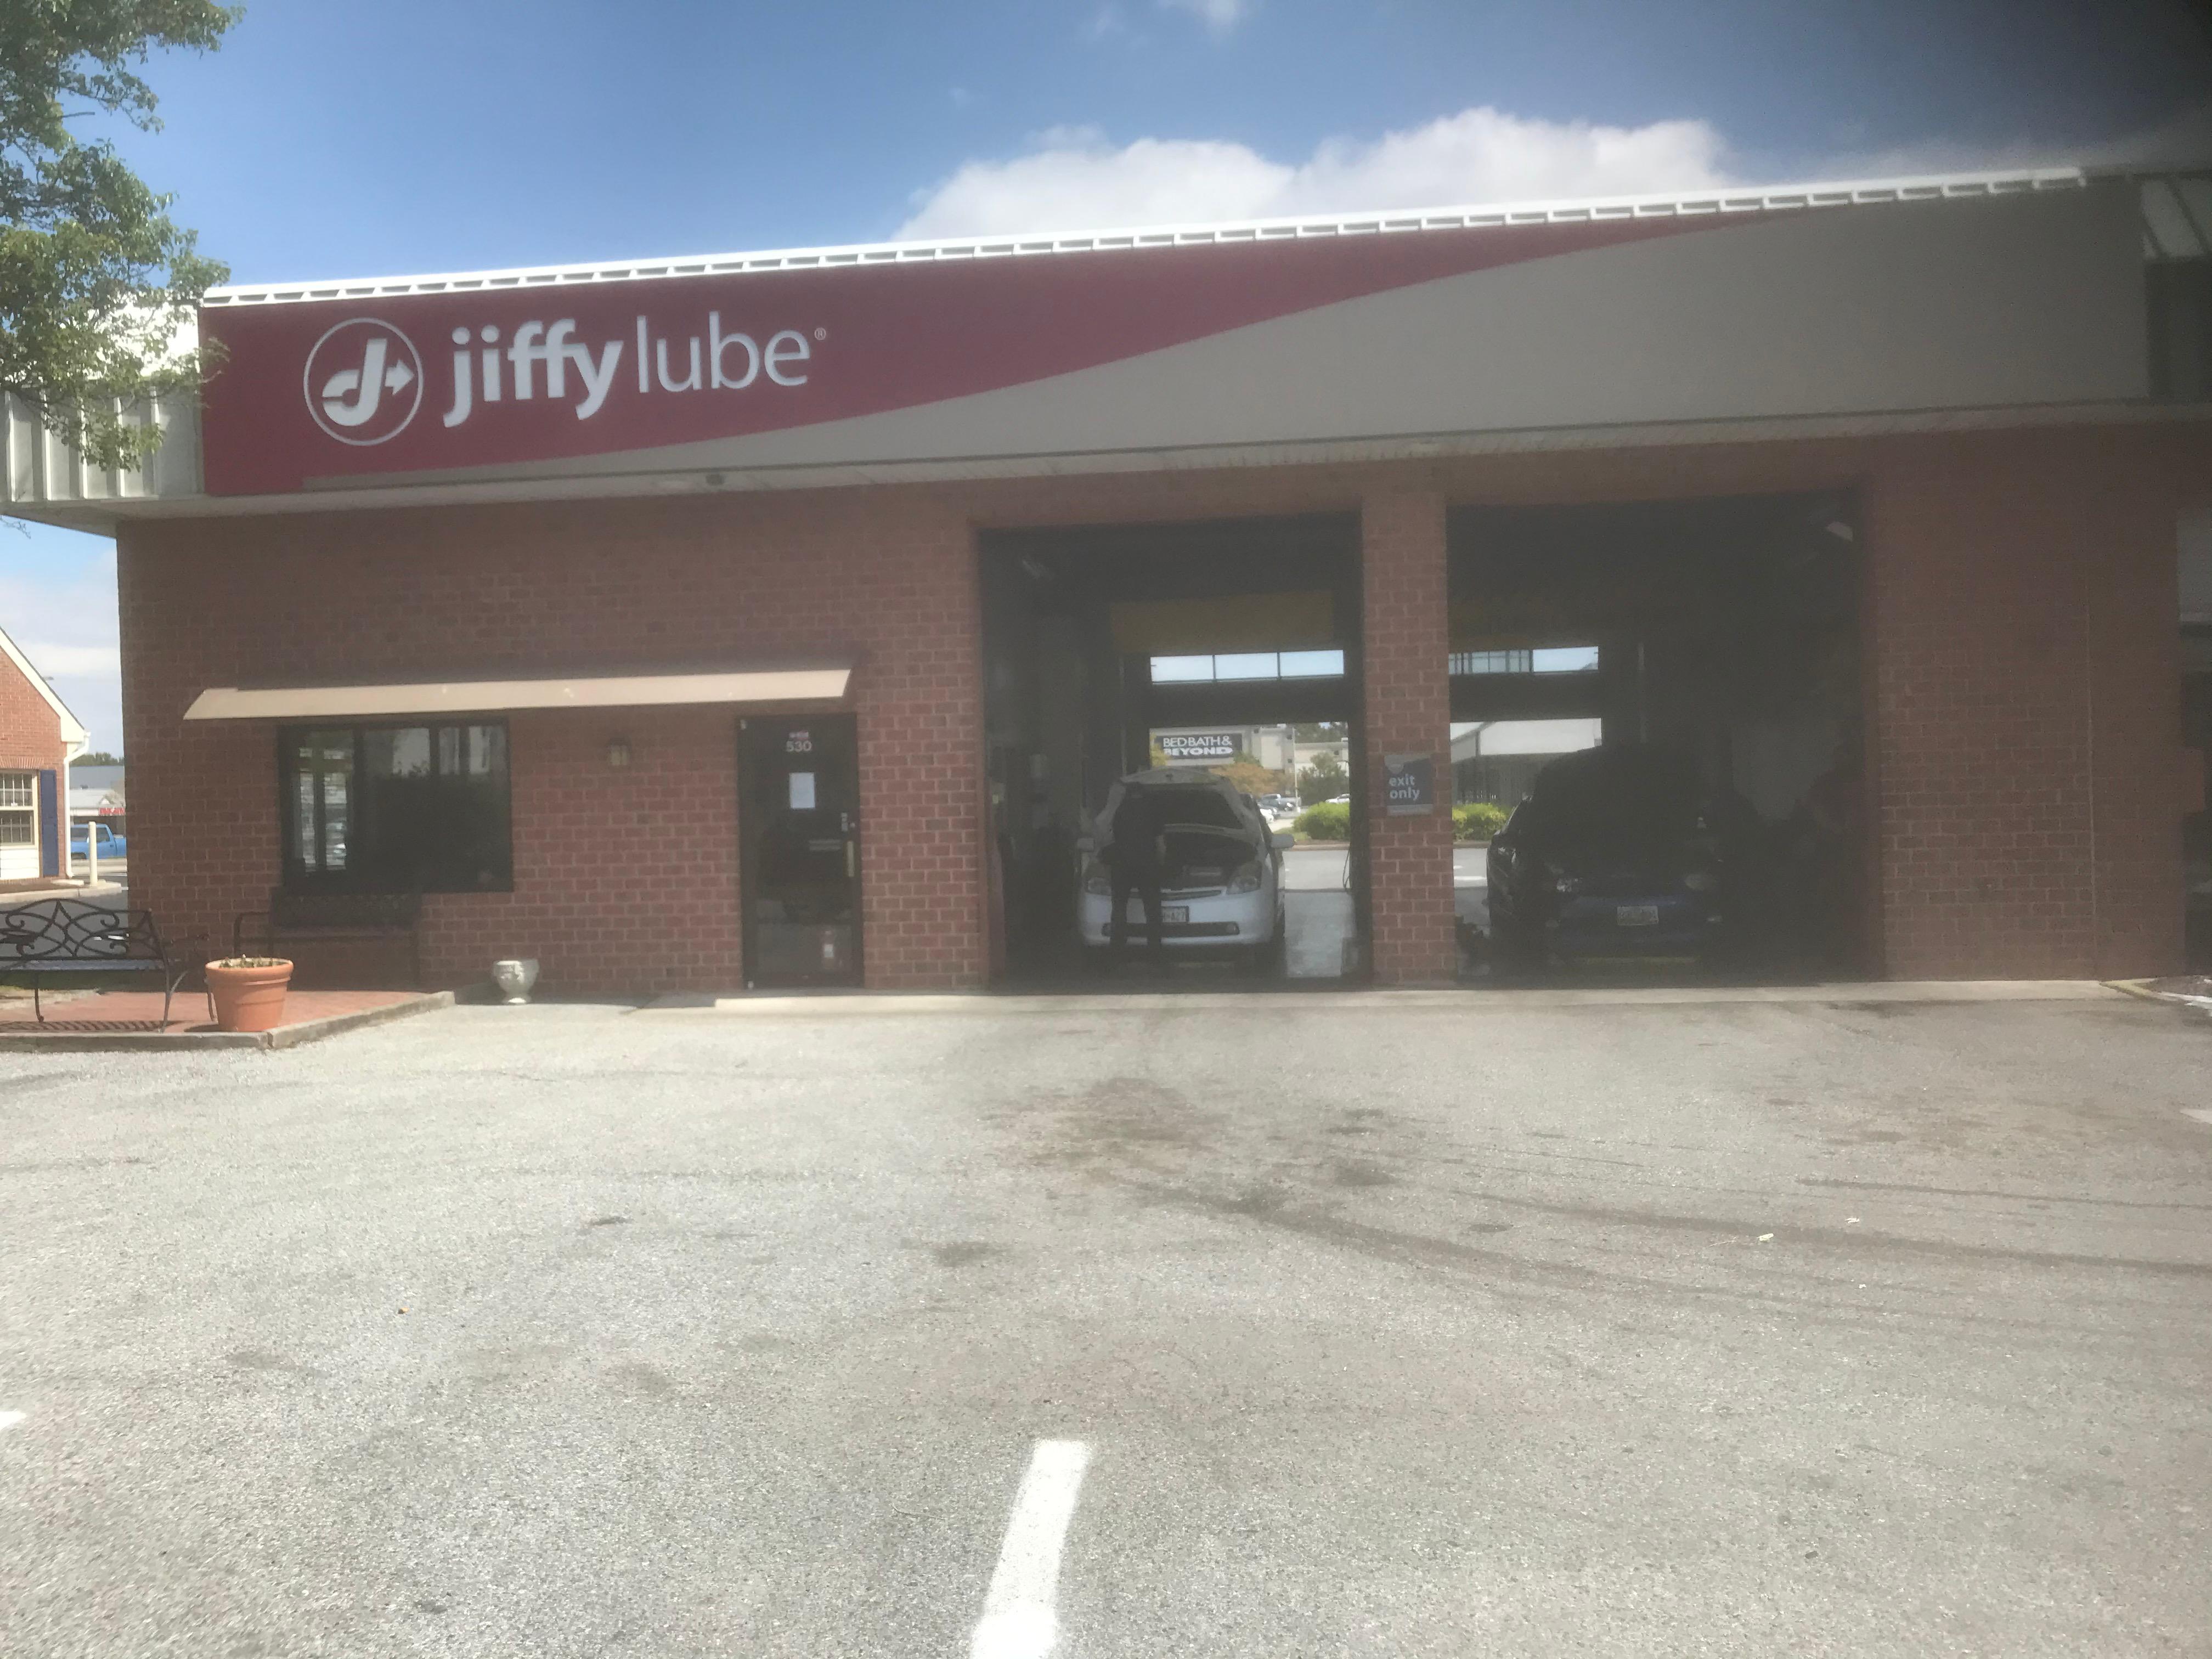 Jiffy Lube Coupons near me in Ocean City, MD 21842 | 8coupons